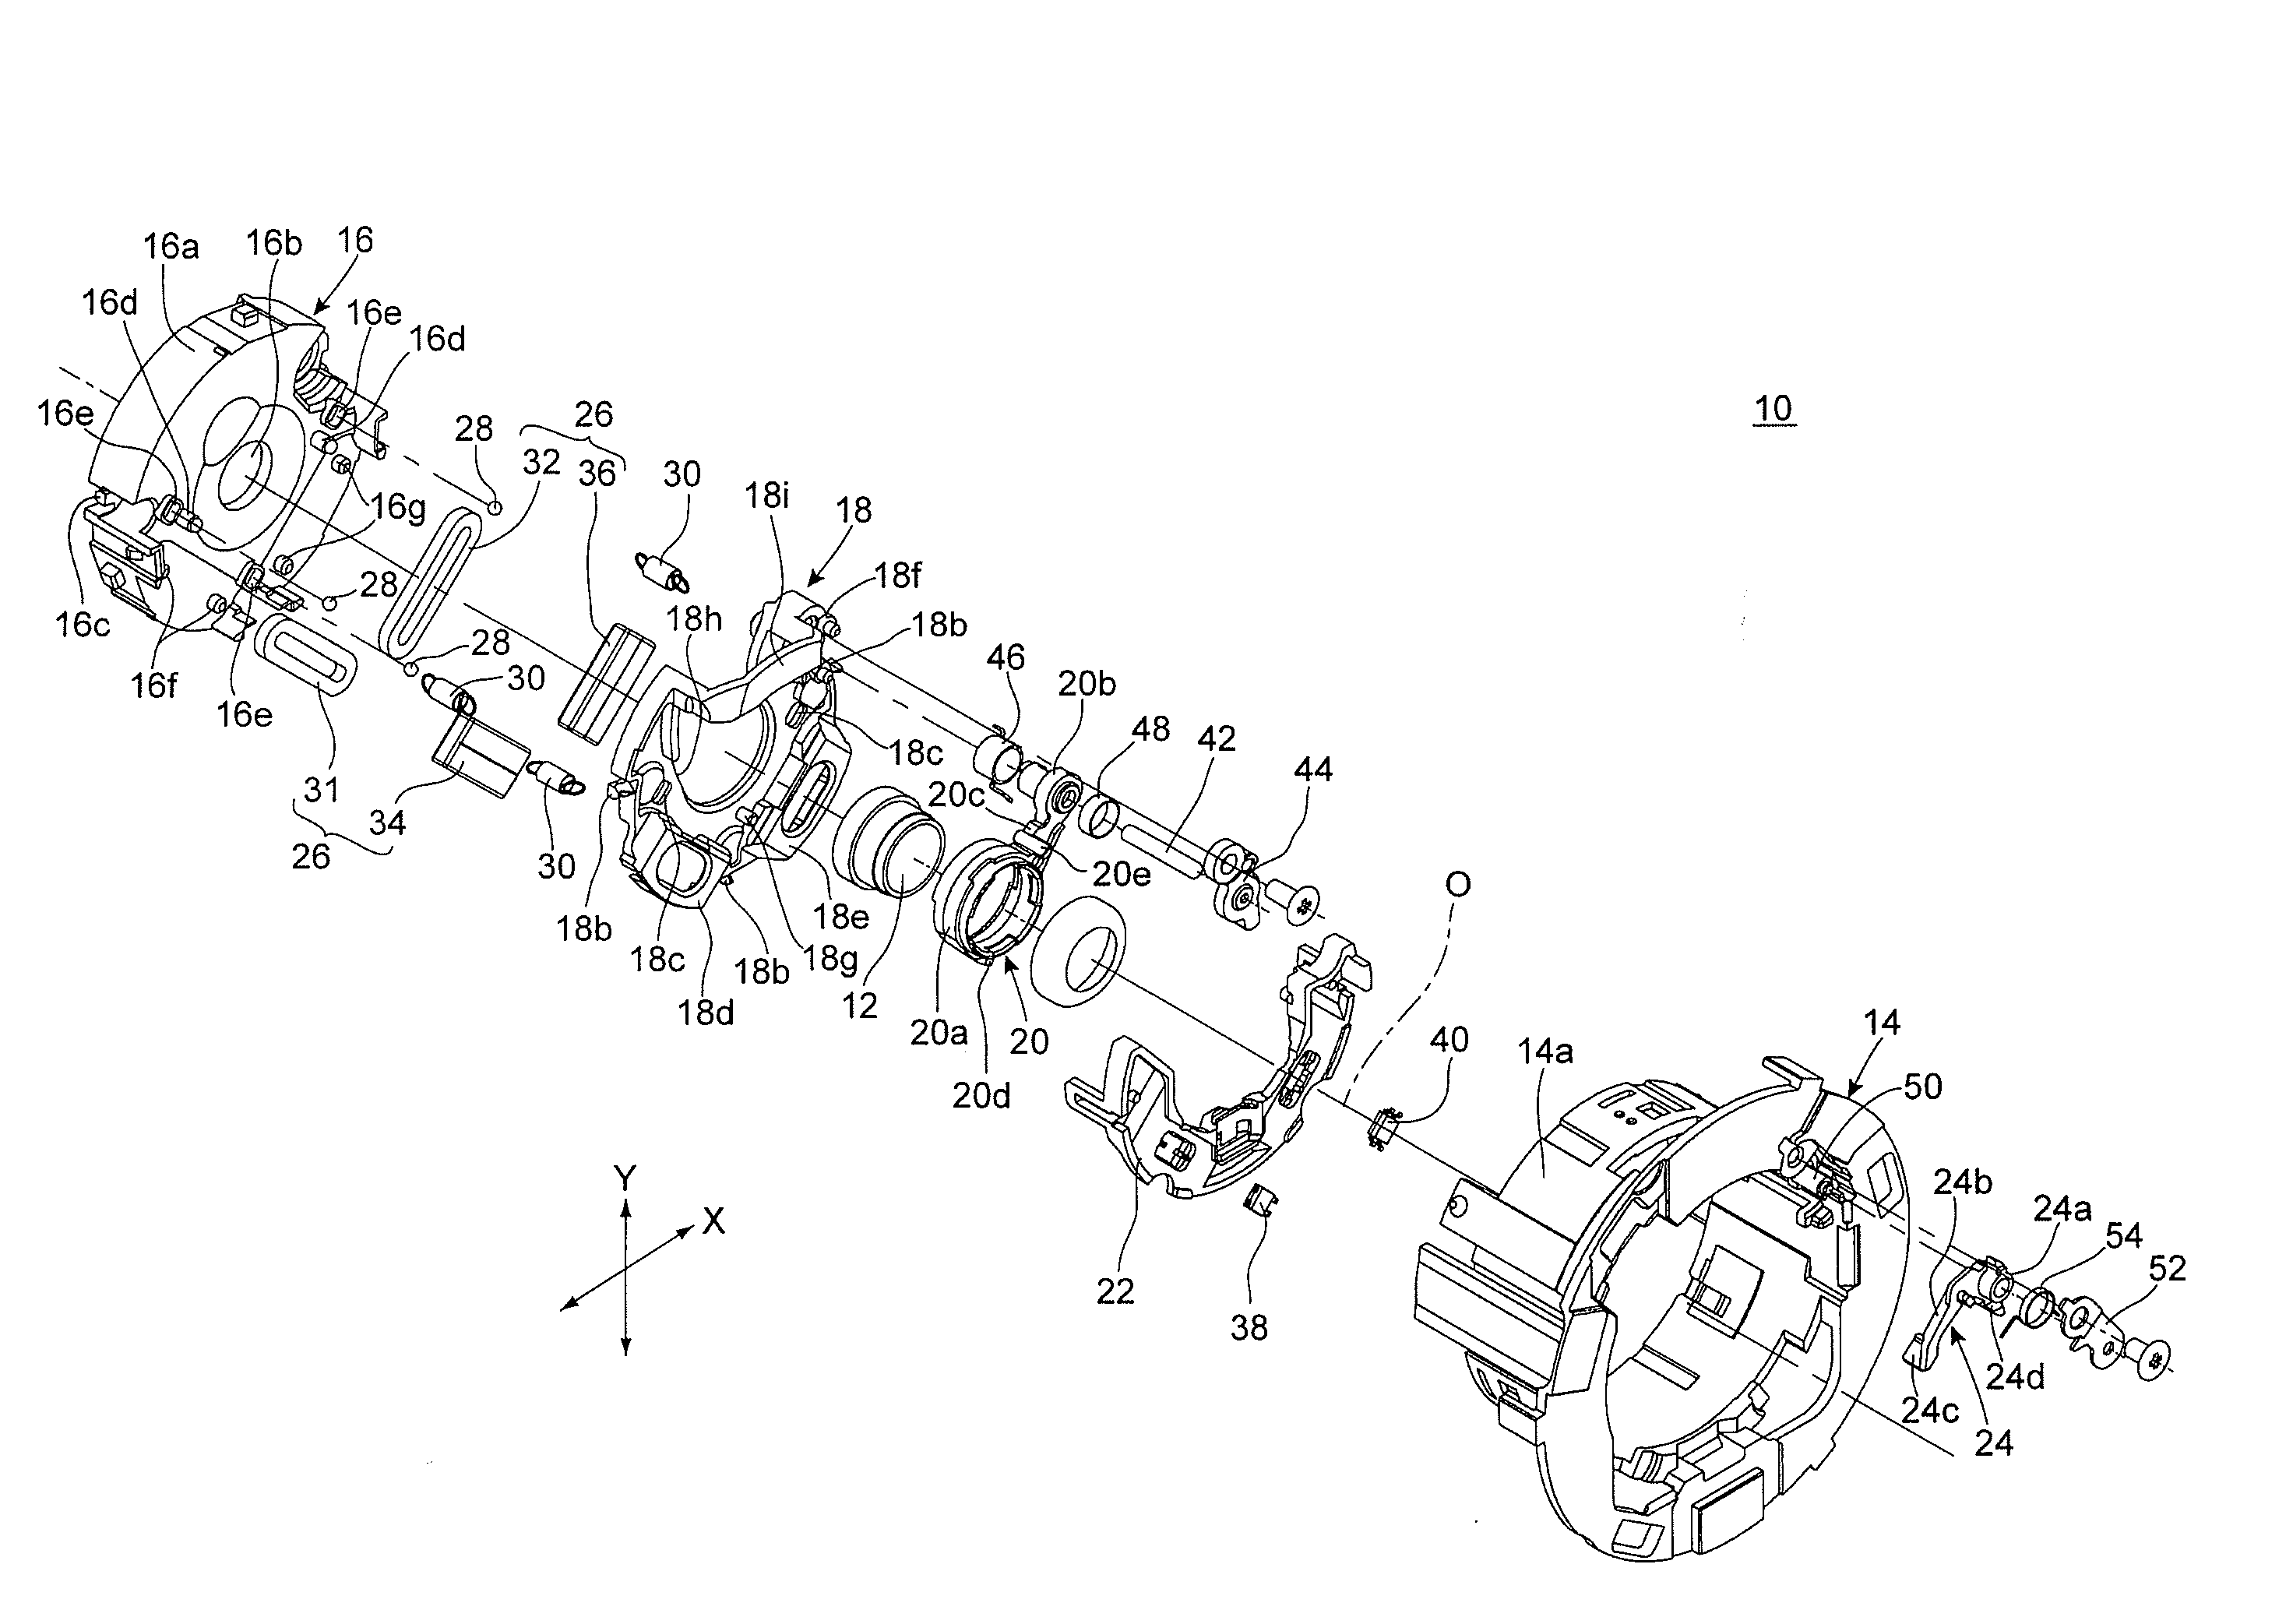 Position controller for image-stabilizing insertable/removable optical element